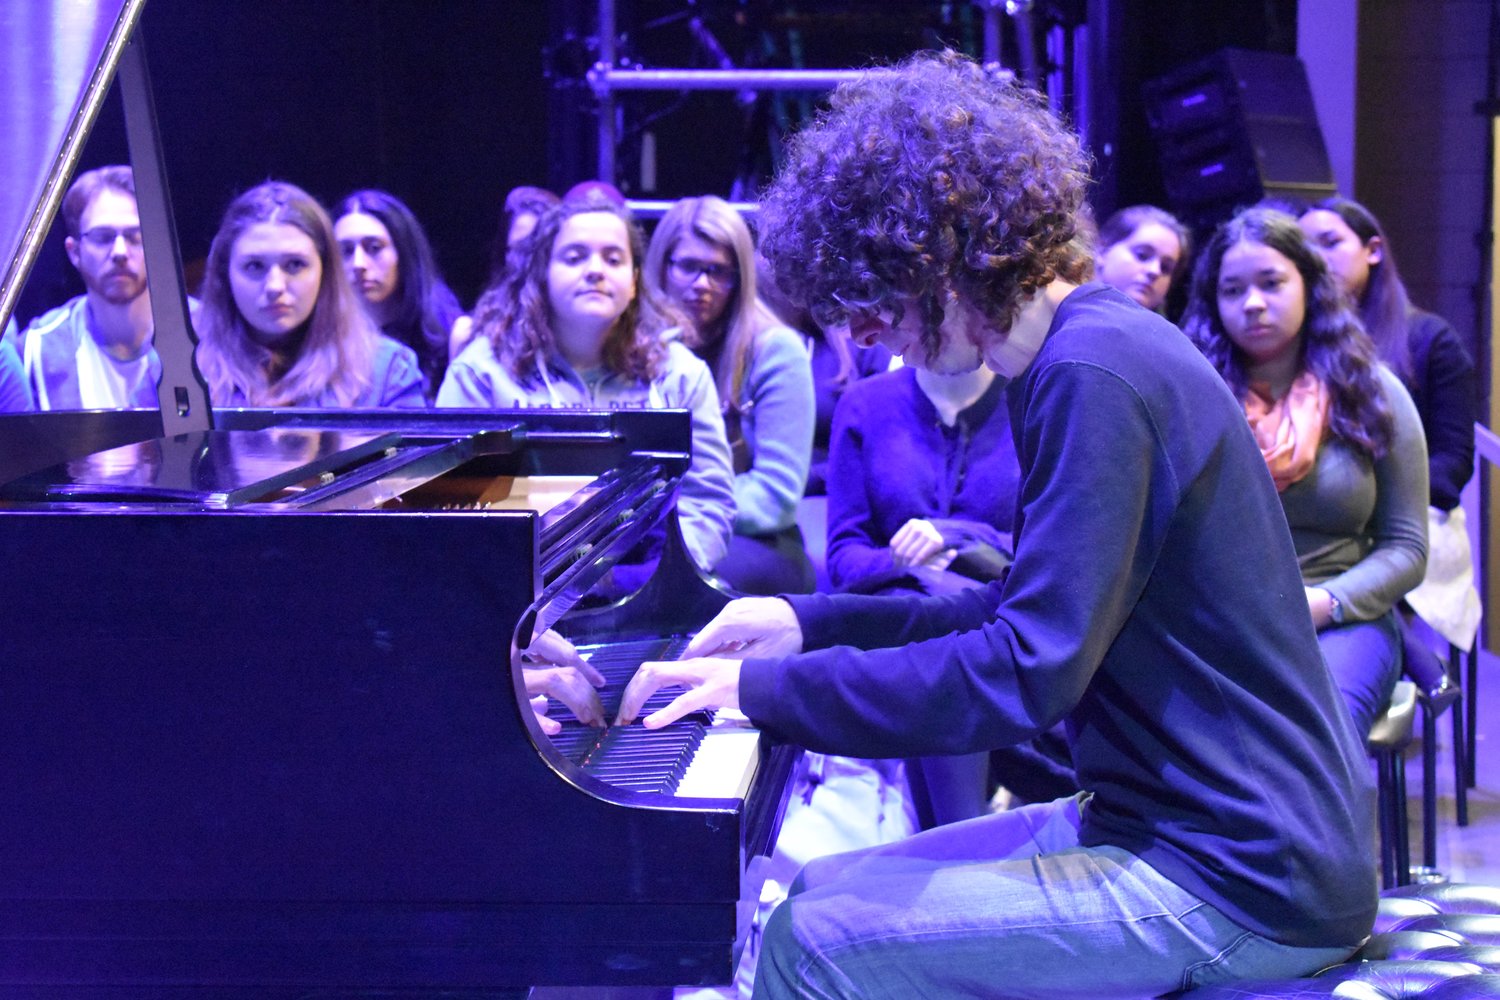 Professional pianist Julian Gargiulo stopped by Molloy College’s Madison Theatre on March 7 to speak to students before his evening performance there.